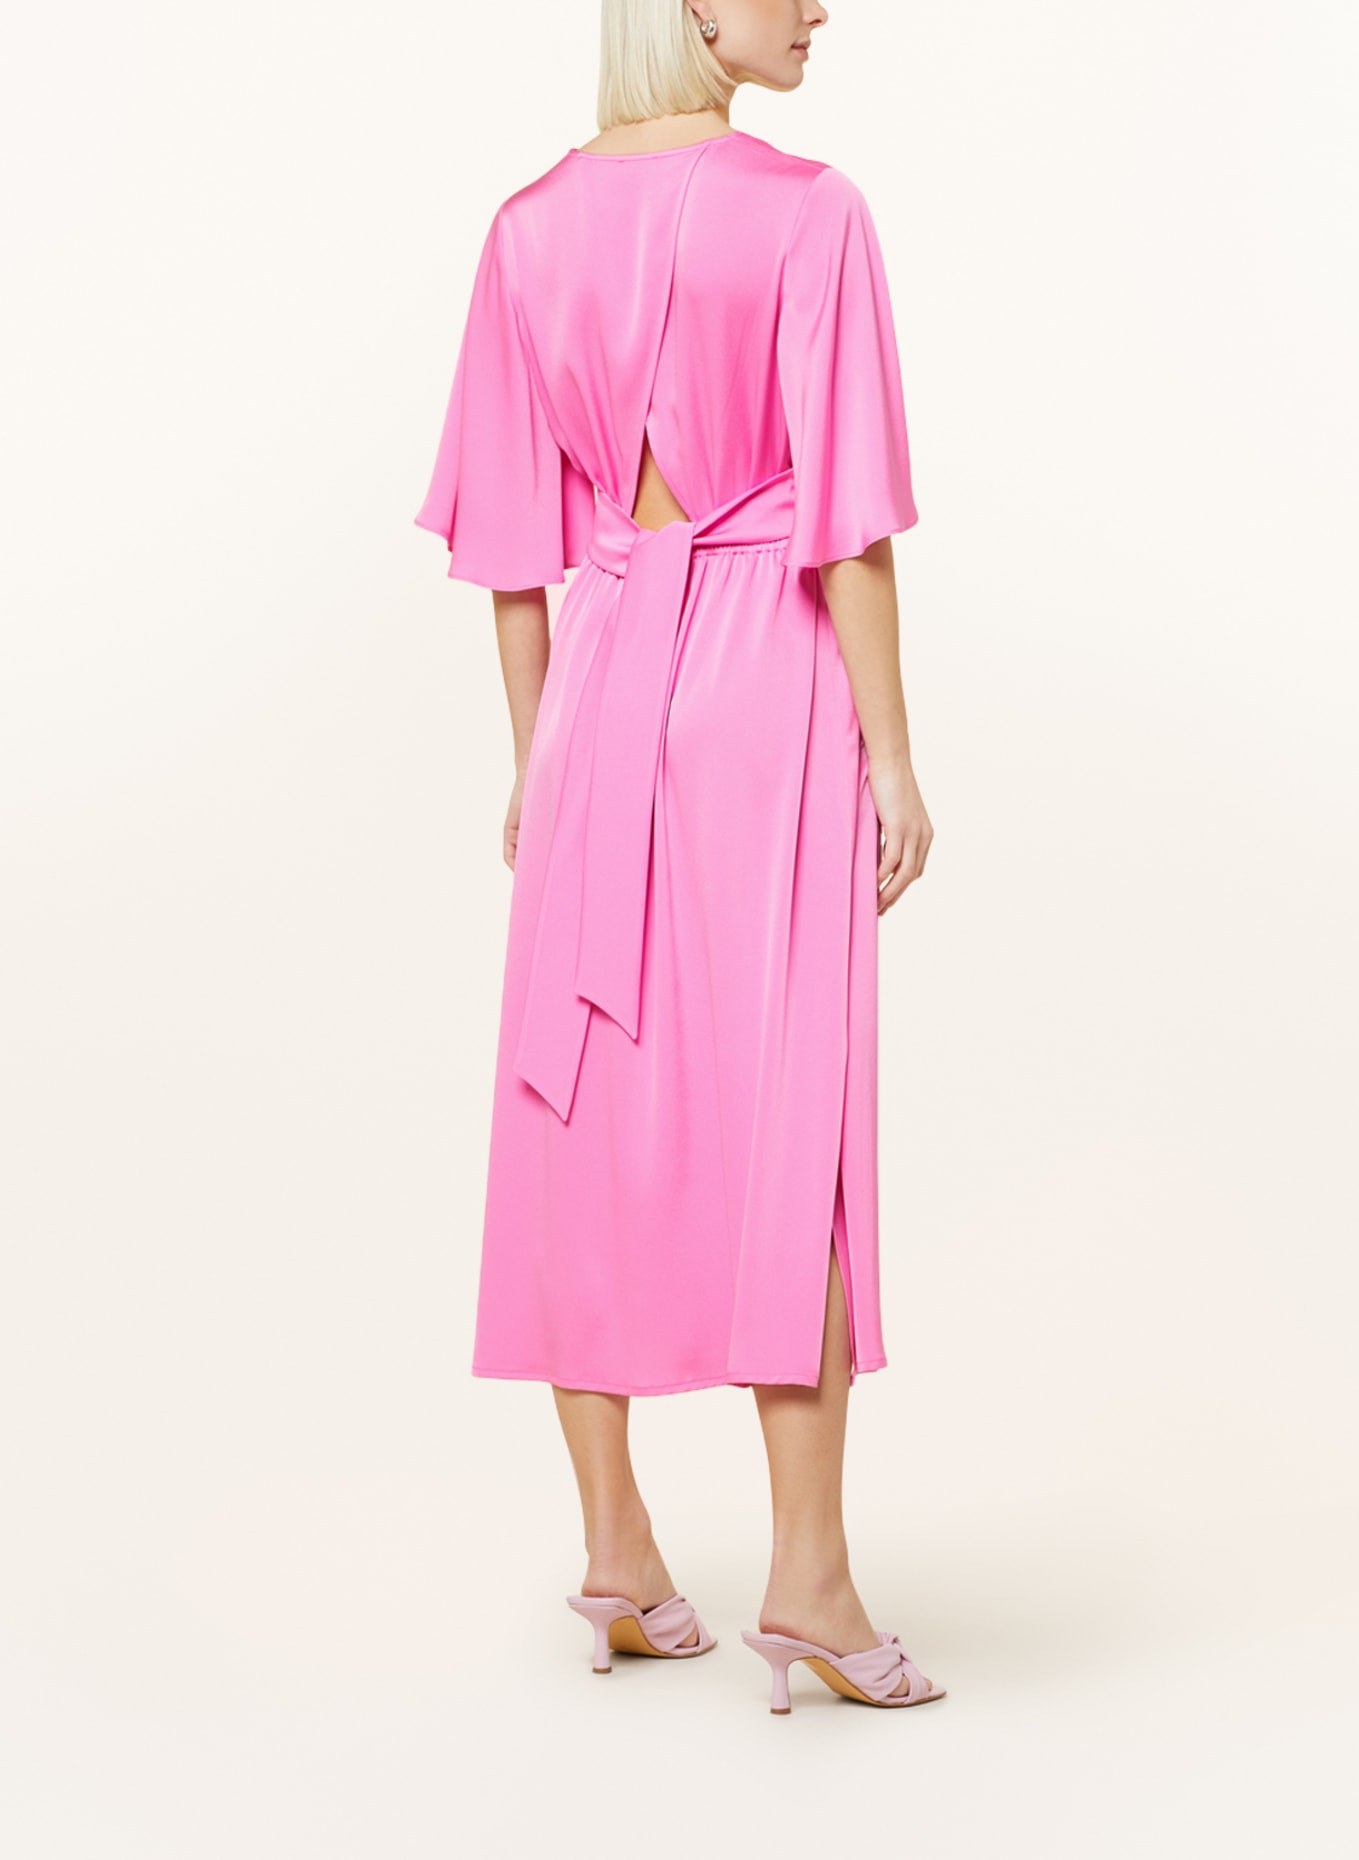 RIANI Satin dress with cut-out, Color: PINK (Image 3)